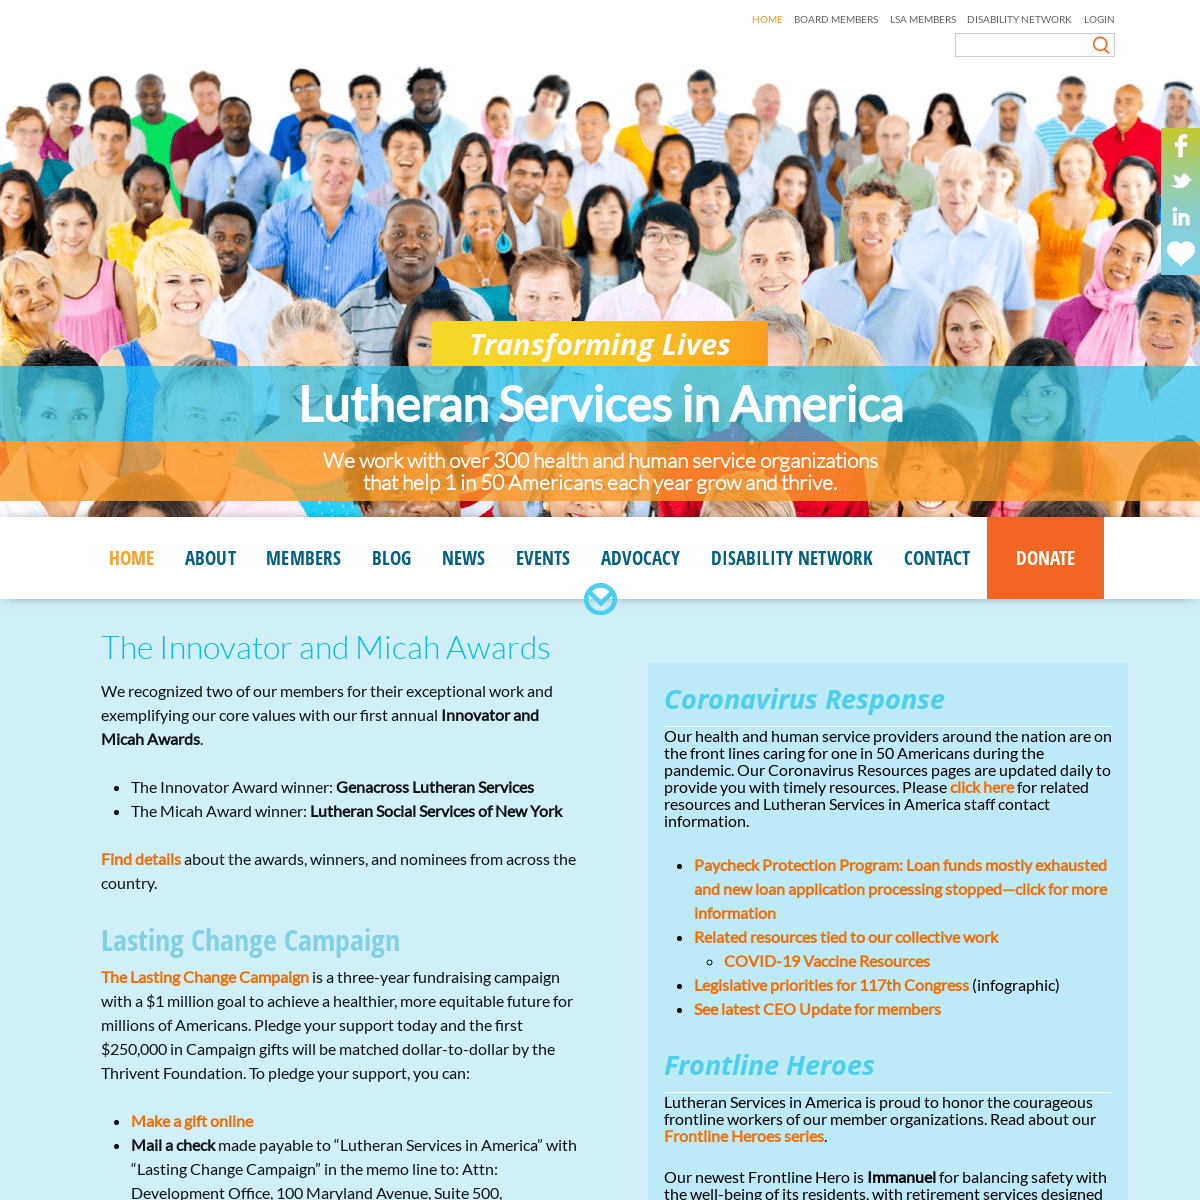 A complete backup of https://lutheranservices.org